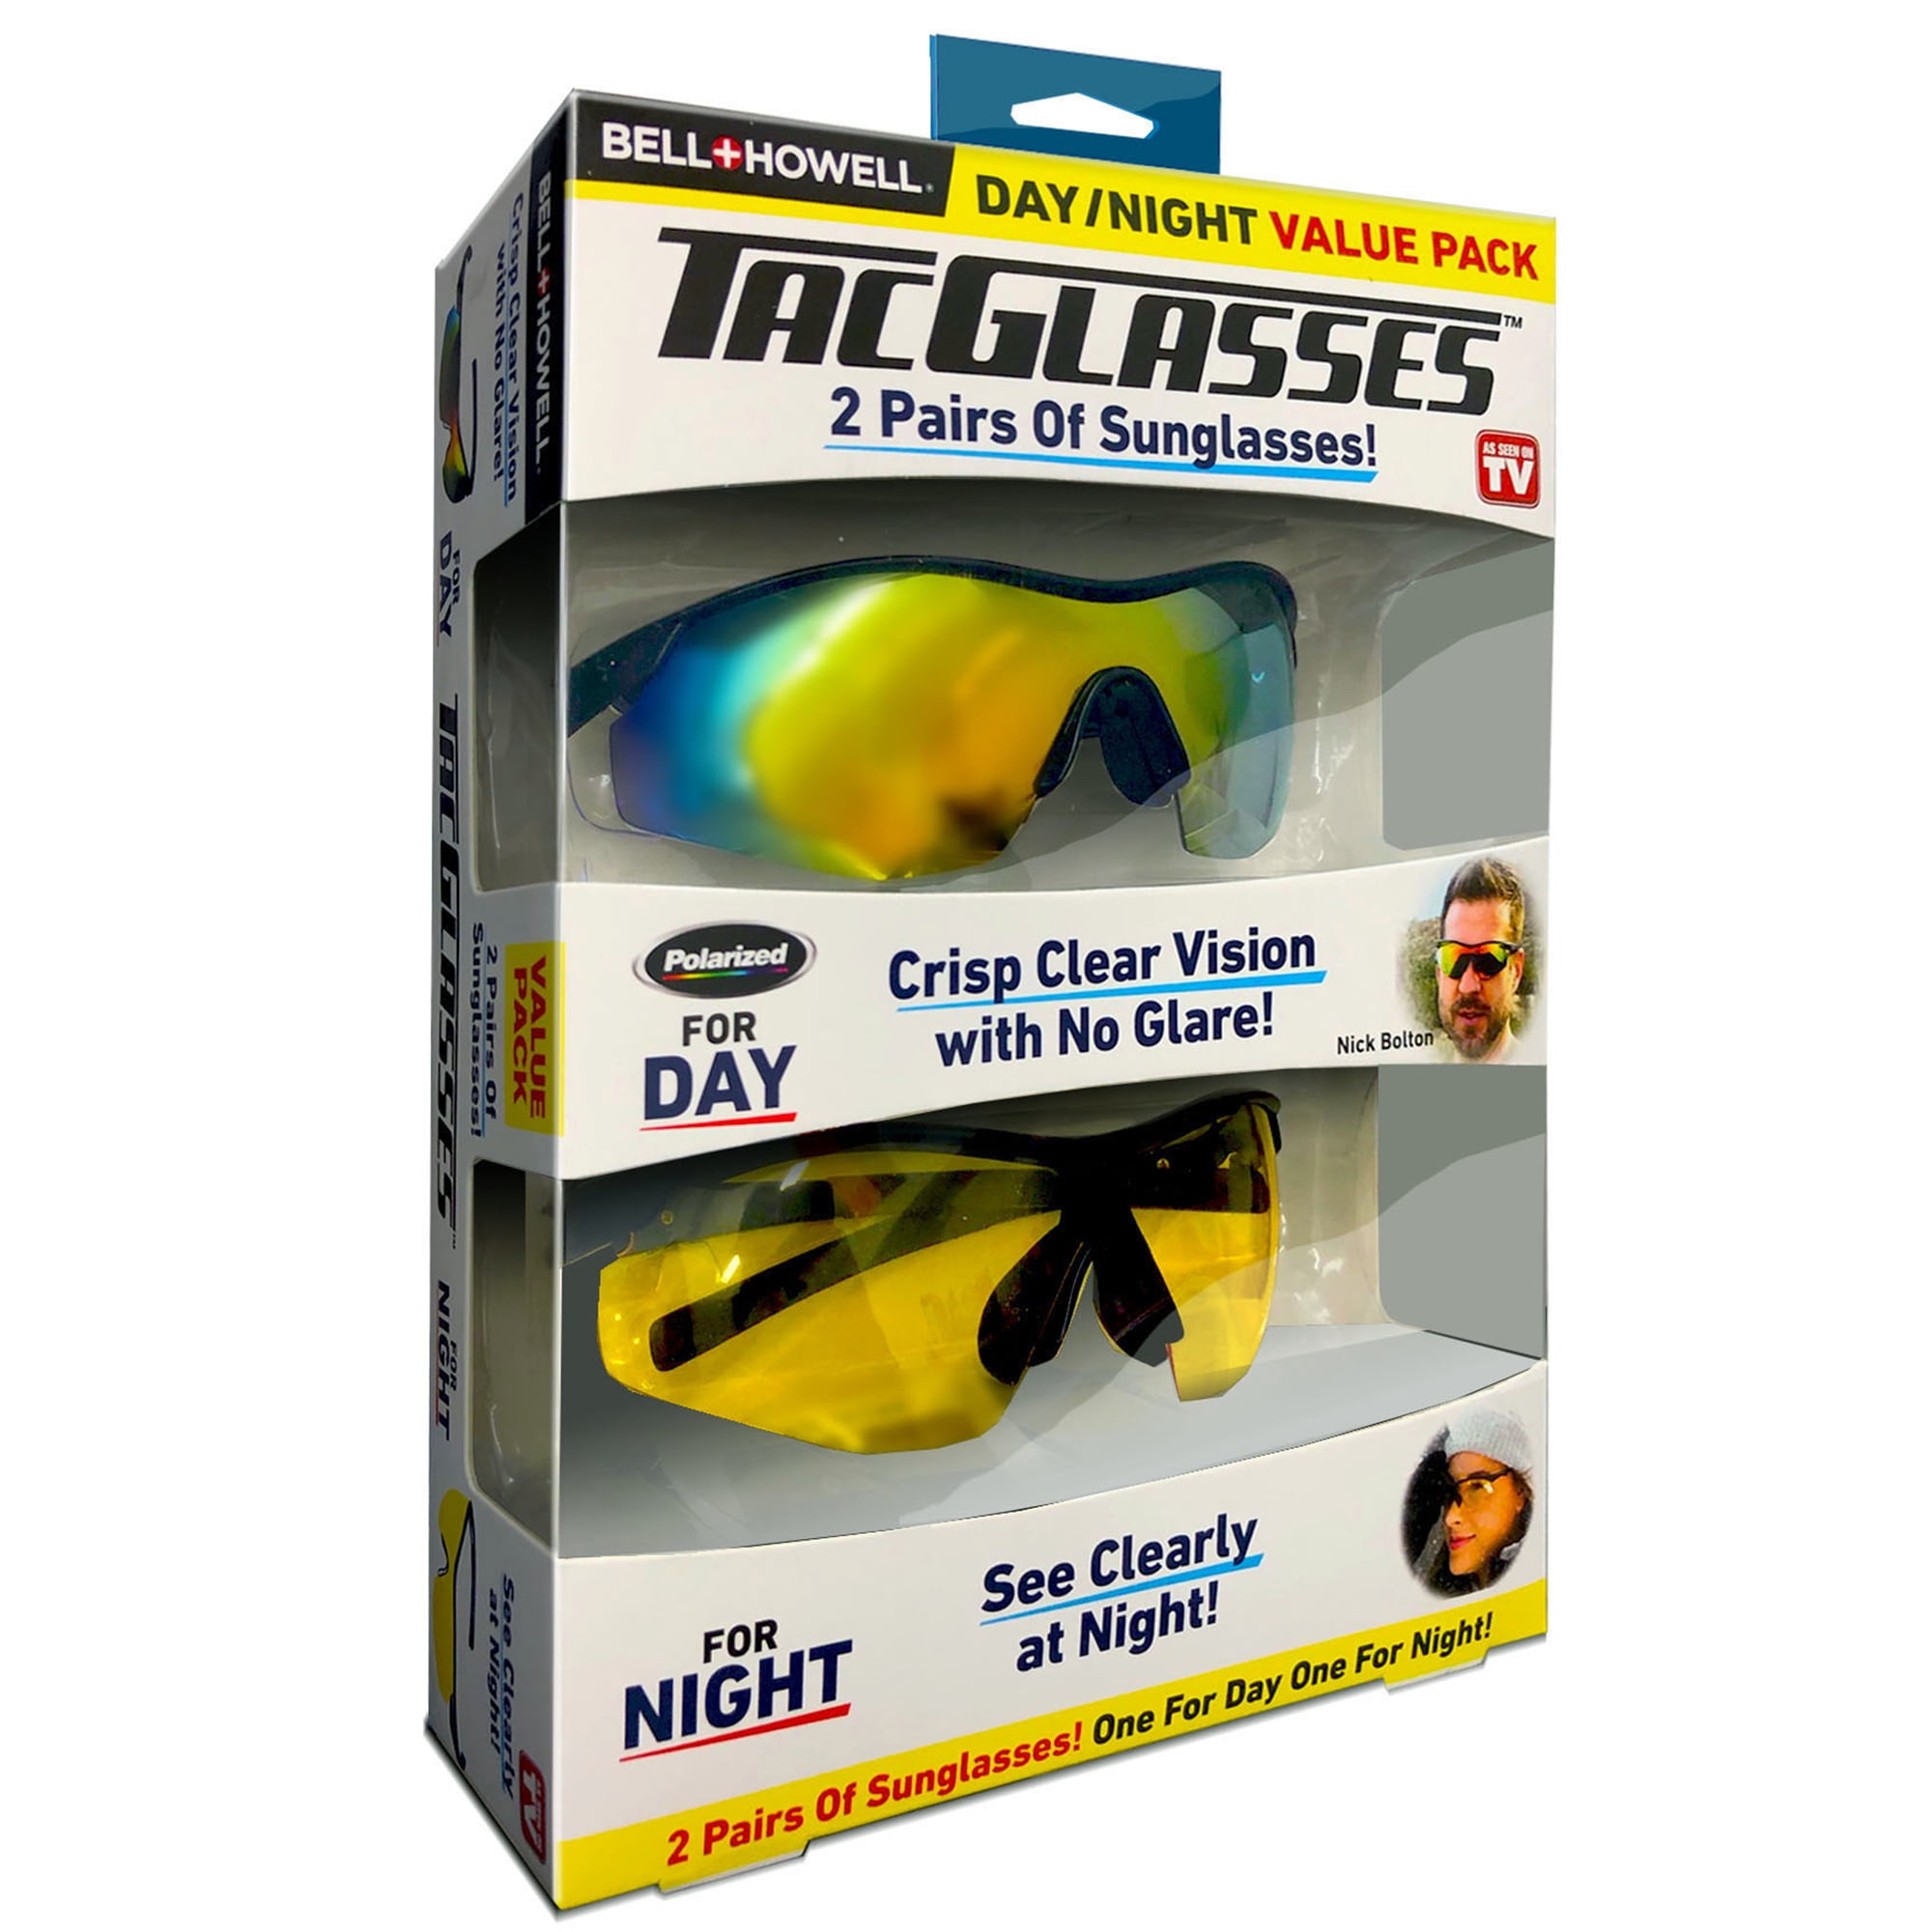 Bell+Howell Tac Glasses Sunglasses, Day/Night, Value Pack - 2 pairs